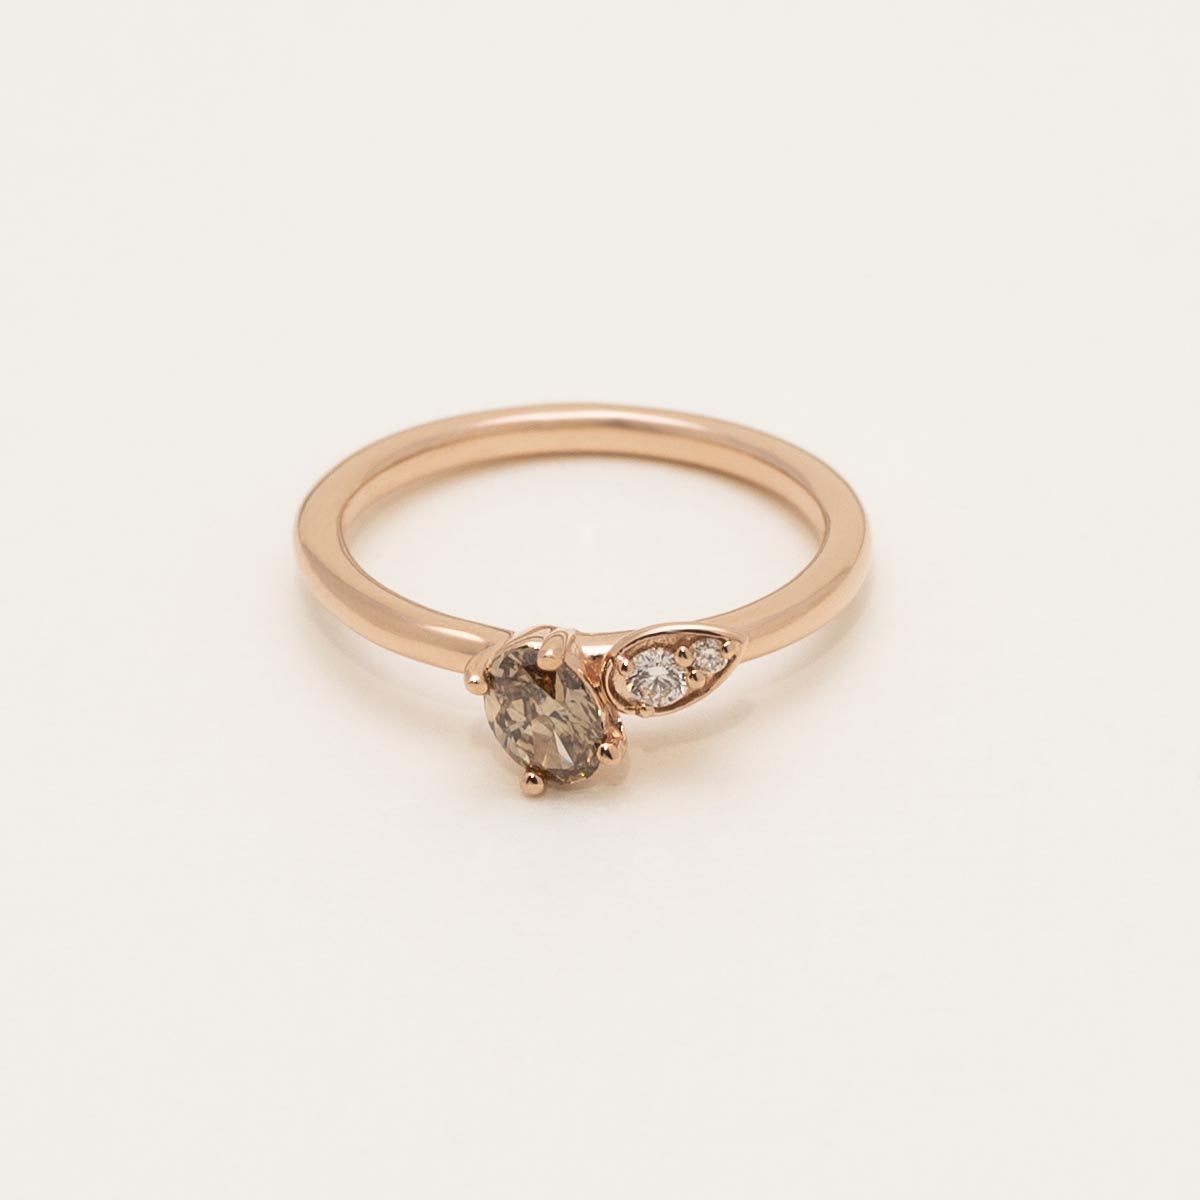 Oval Yellow and White Diamond Ring in 14kt Rose Gold (1/3ct tw)